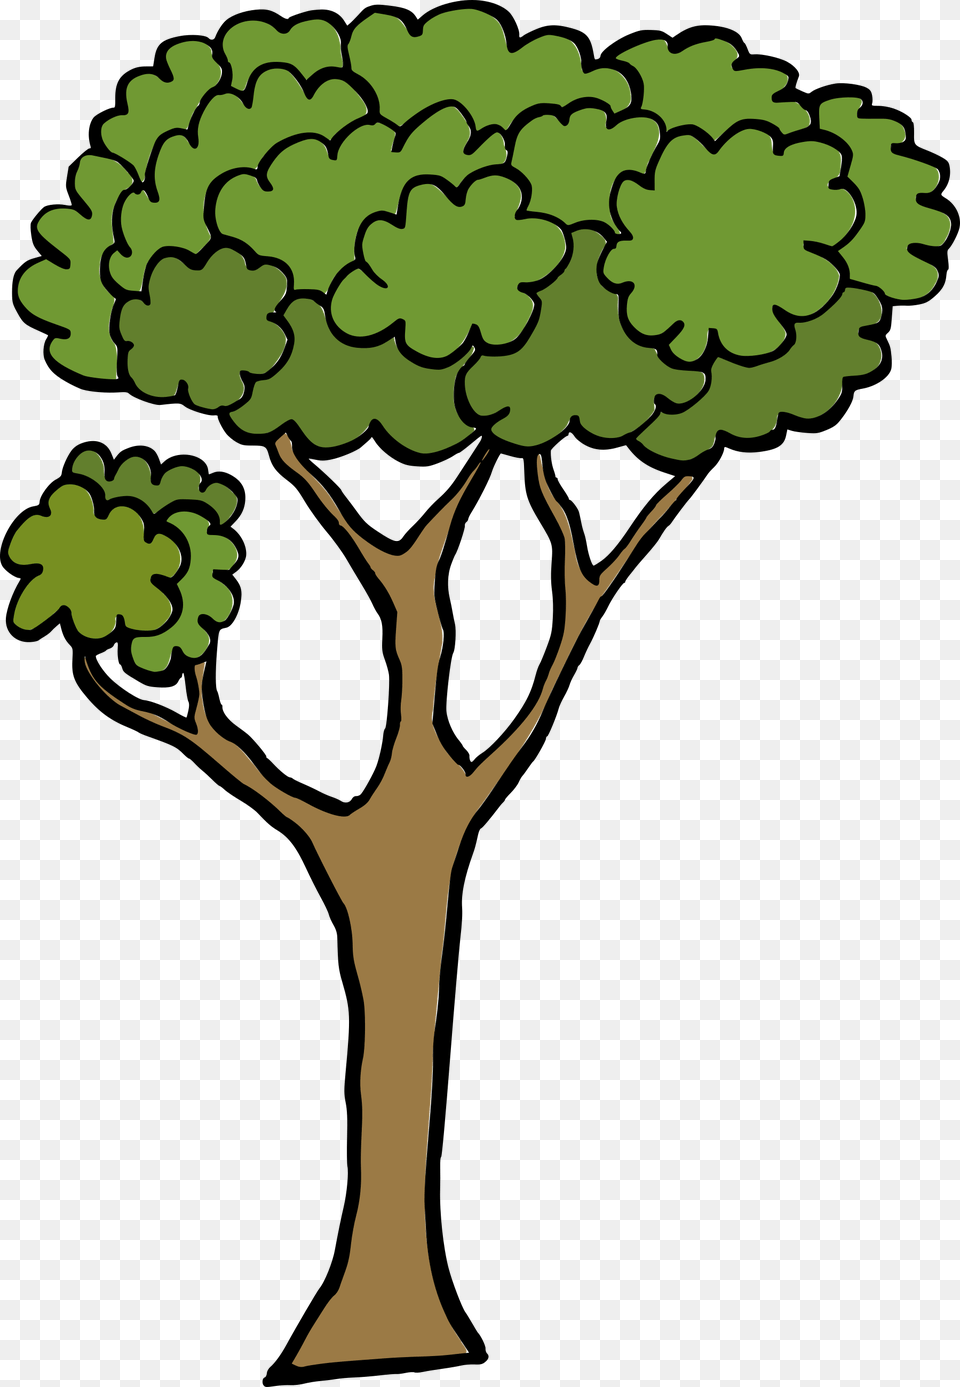 Cartoon Tree 1 Cartoon Tree Transparent Background, Plant, Person, Potted Plant, Tree Trunk Png